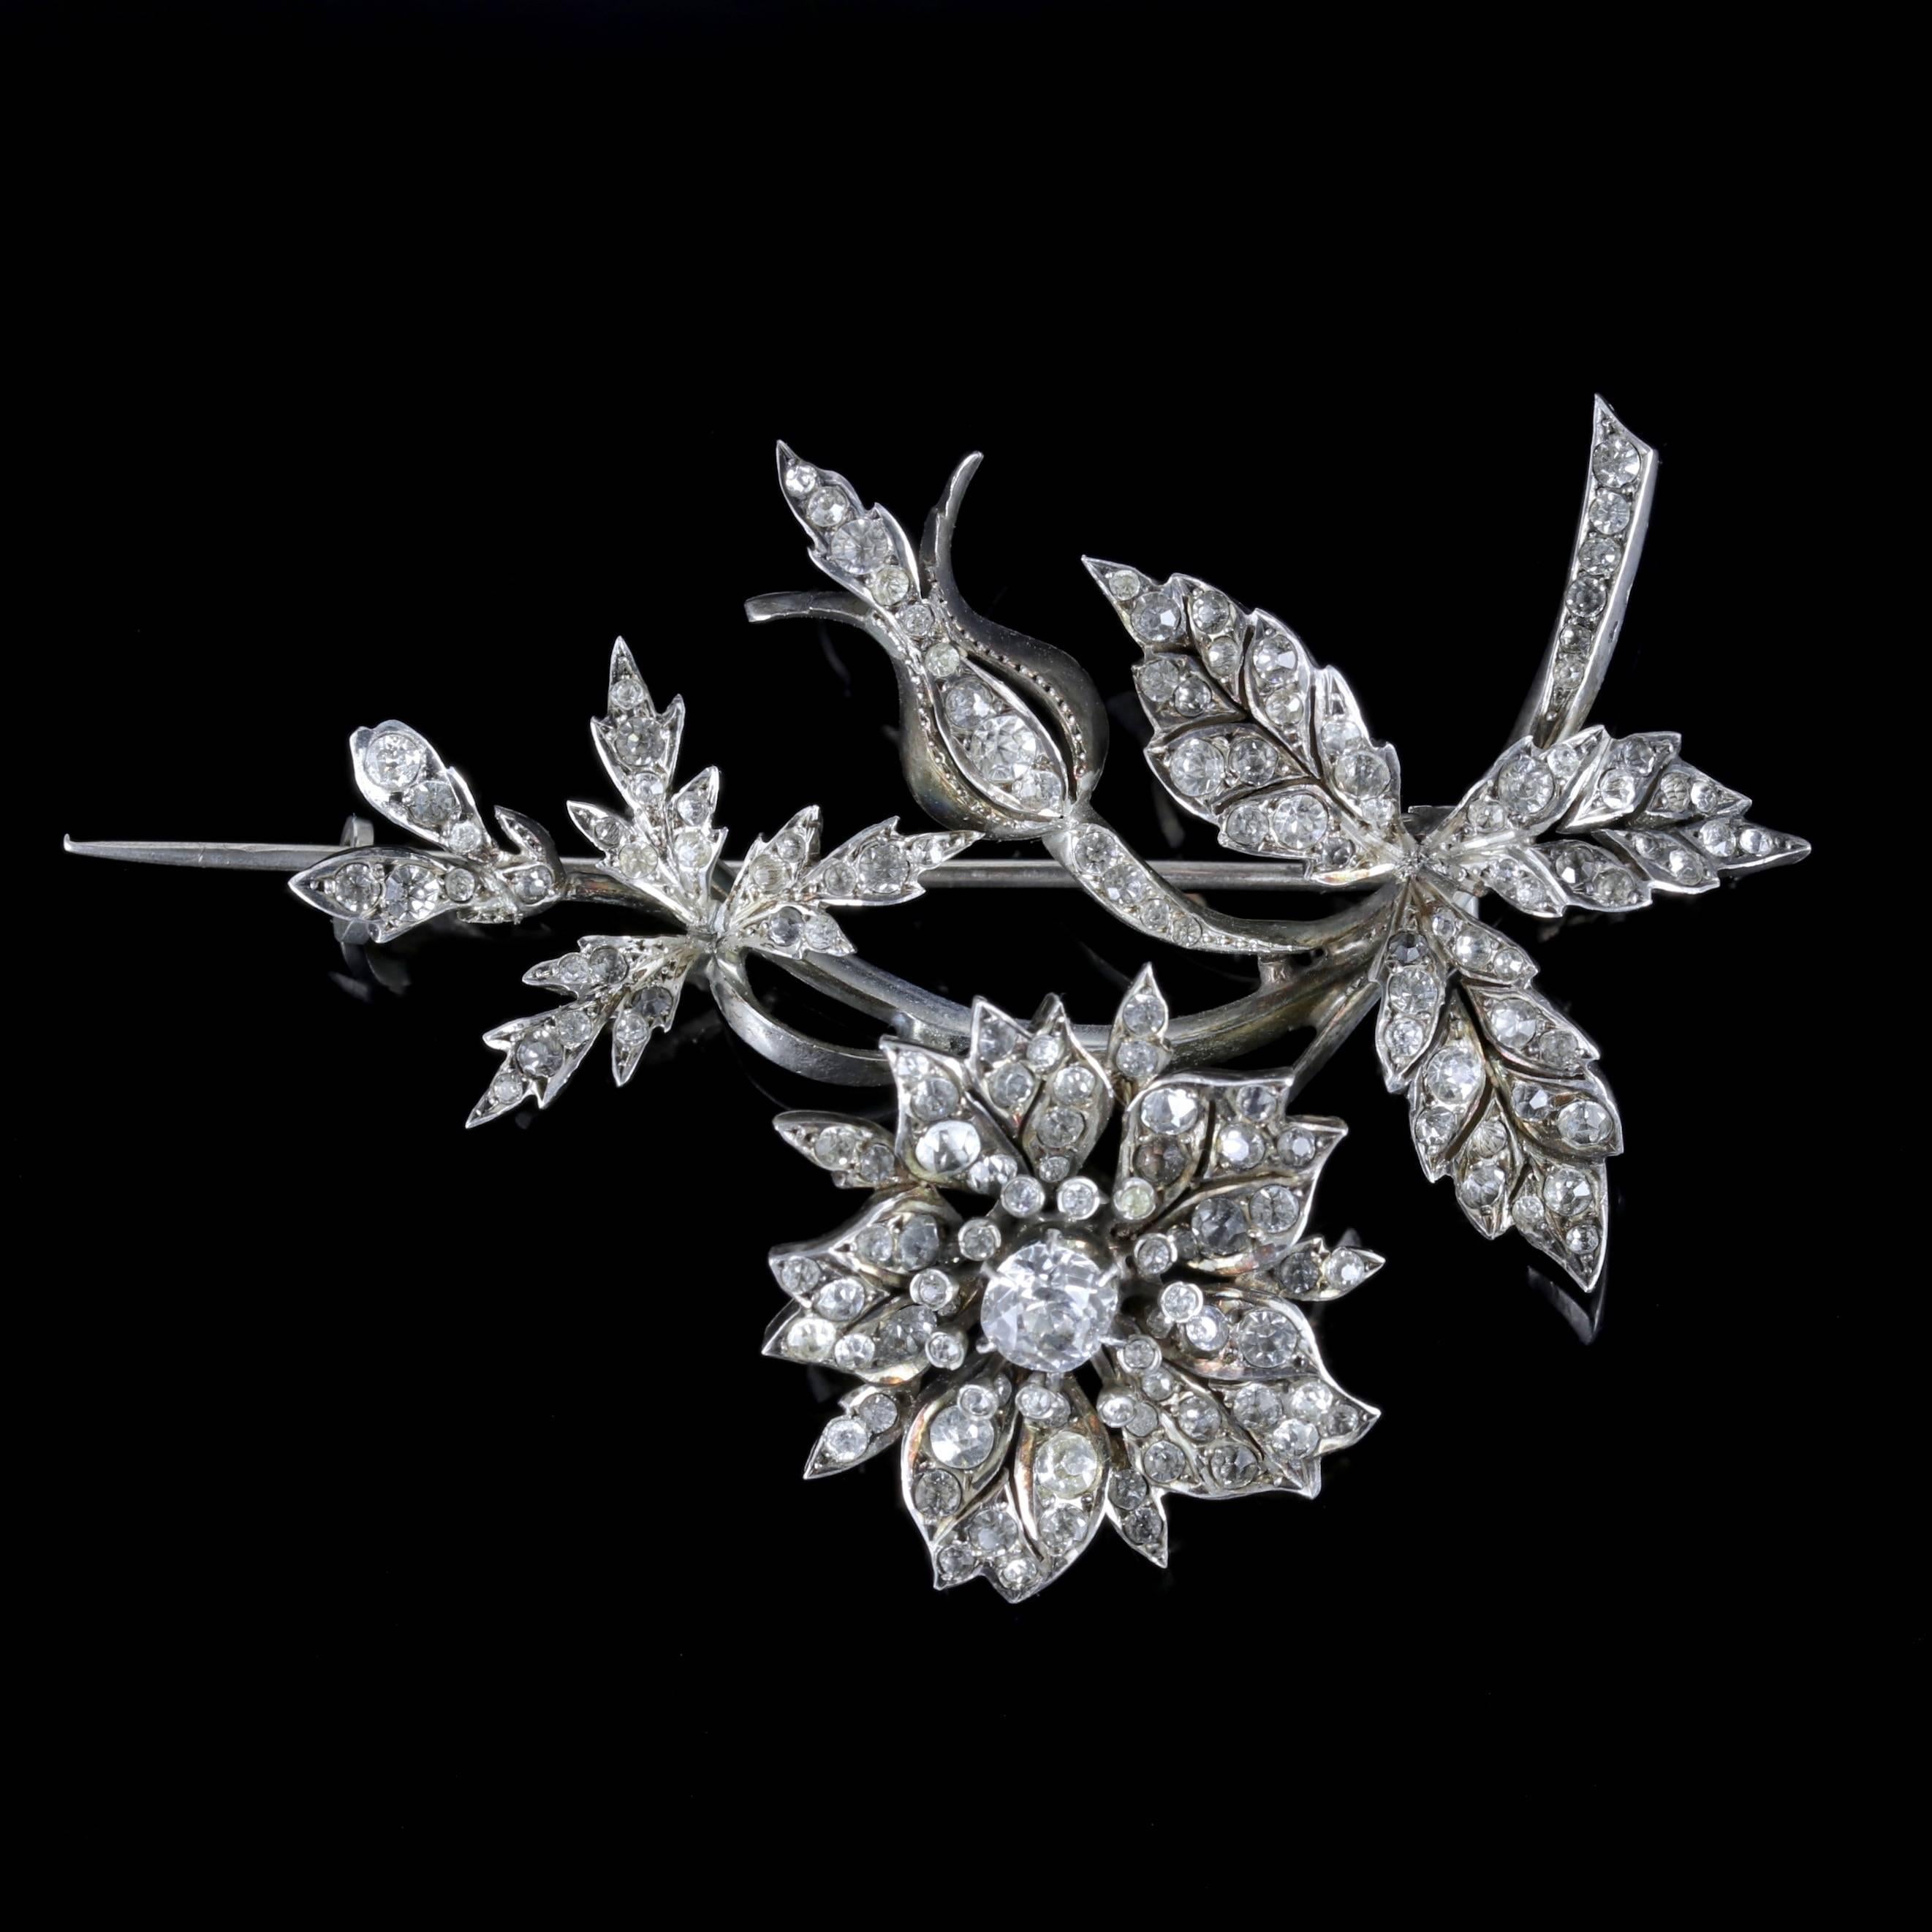 To read more please click continue reading below-

This magnificent antique French Trembler brooch was made during the Victorian era, Circa 1880. 

The wonderful brooch depicts a bouquet of beautiful flowers which are adorned with sparkling white